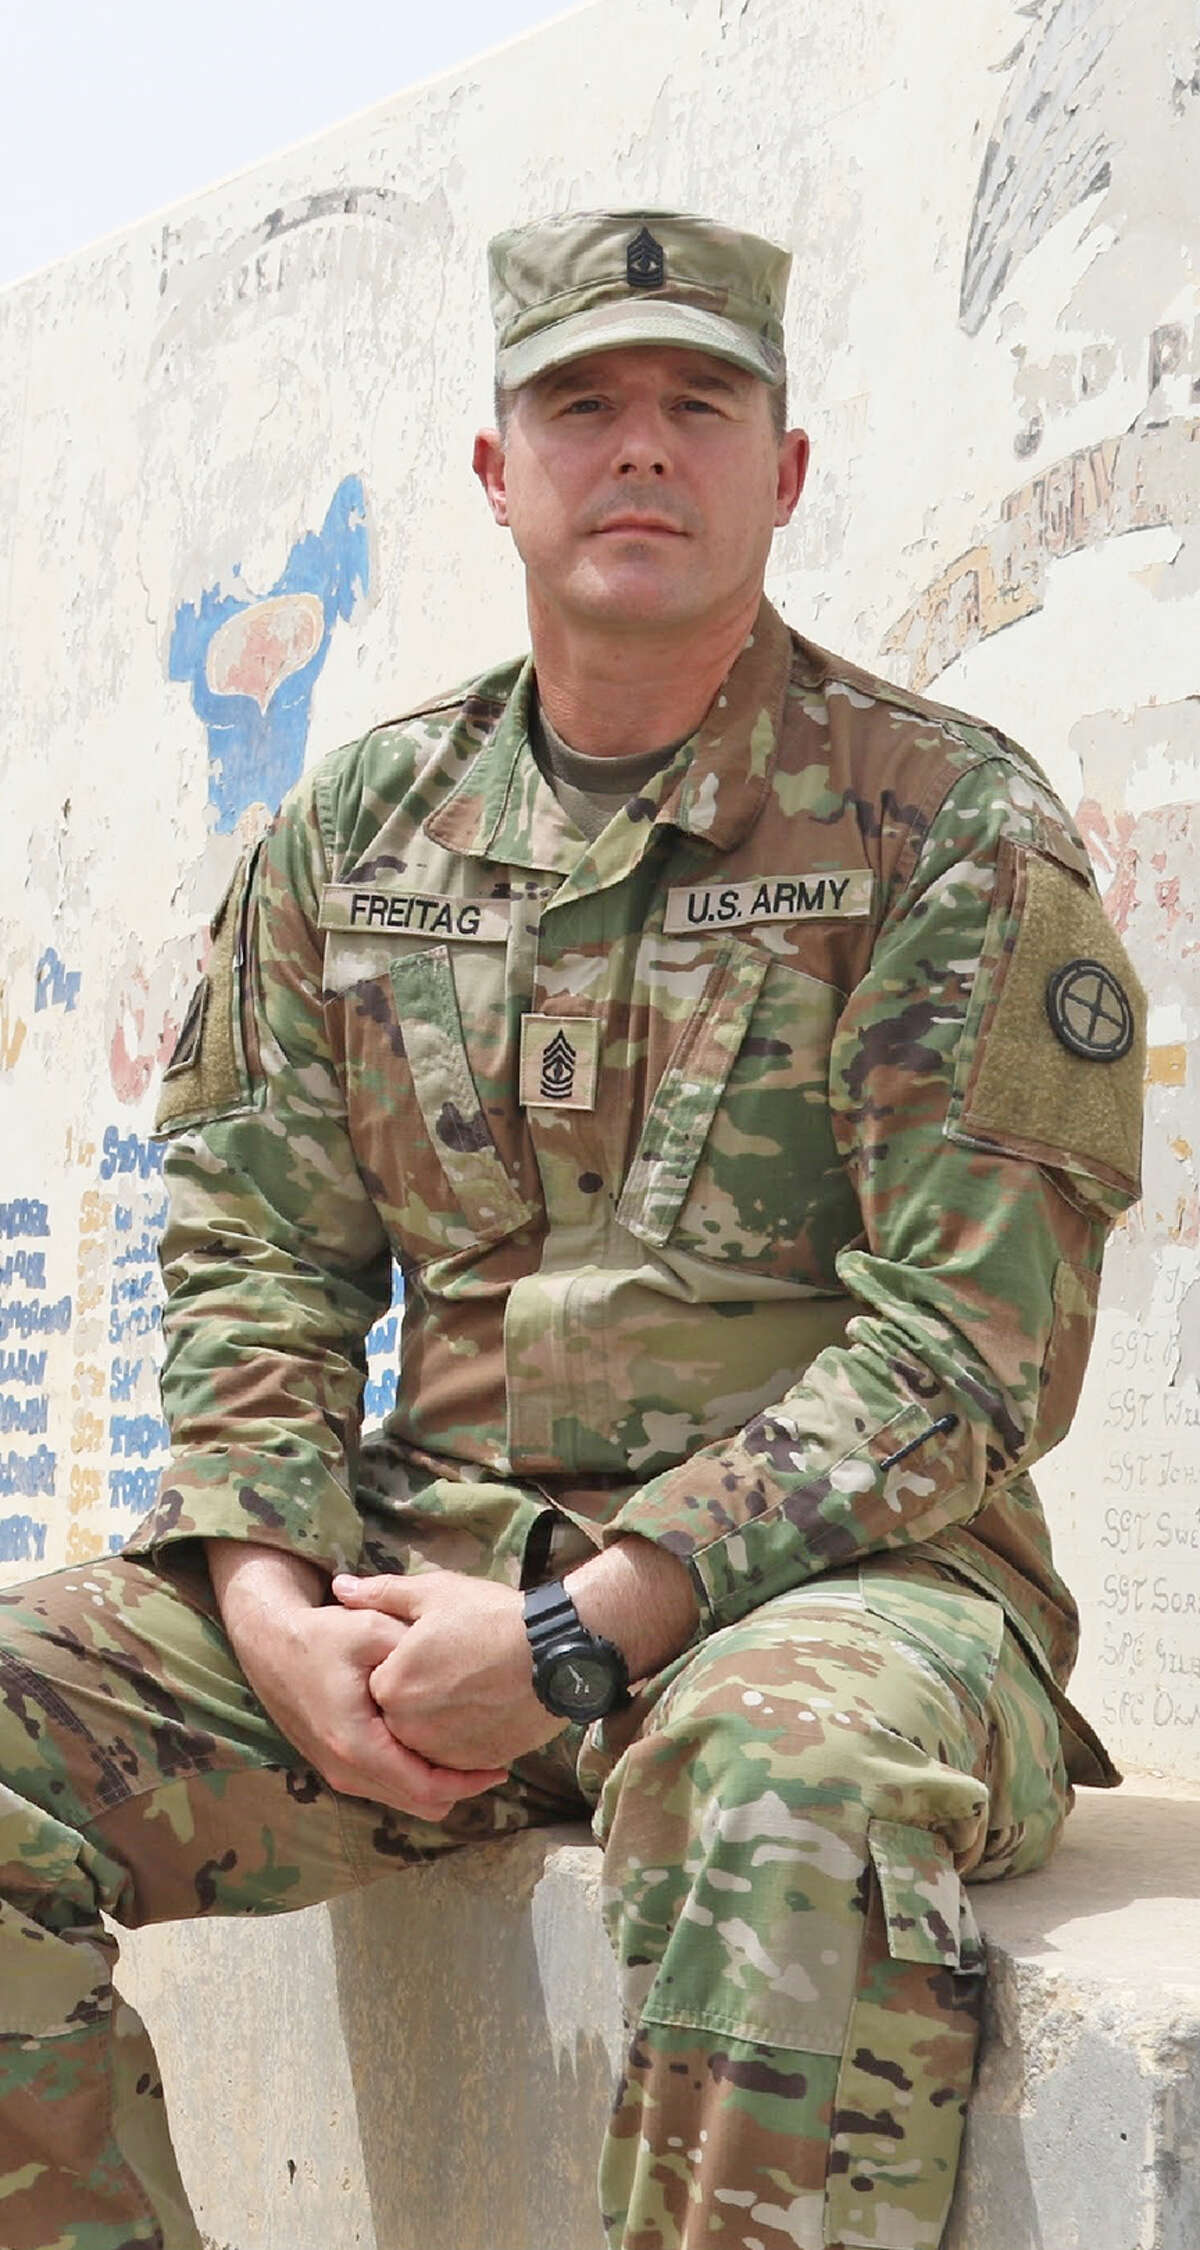 Army First Sergeant Clint Freitag, a longtime Edwardsville resident, suffered a spinal injury on Sept. 10 while on deployment in Kuwait. He recently returned to the U.S. and had surgery Wednesday at Walter Reed National Military Medical Center in Washington, D.C.